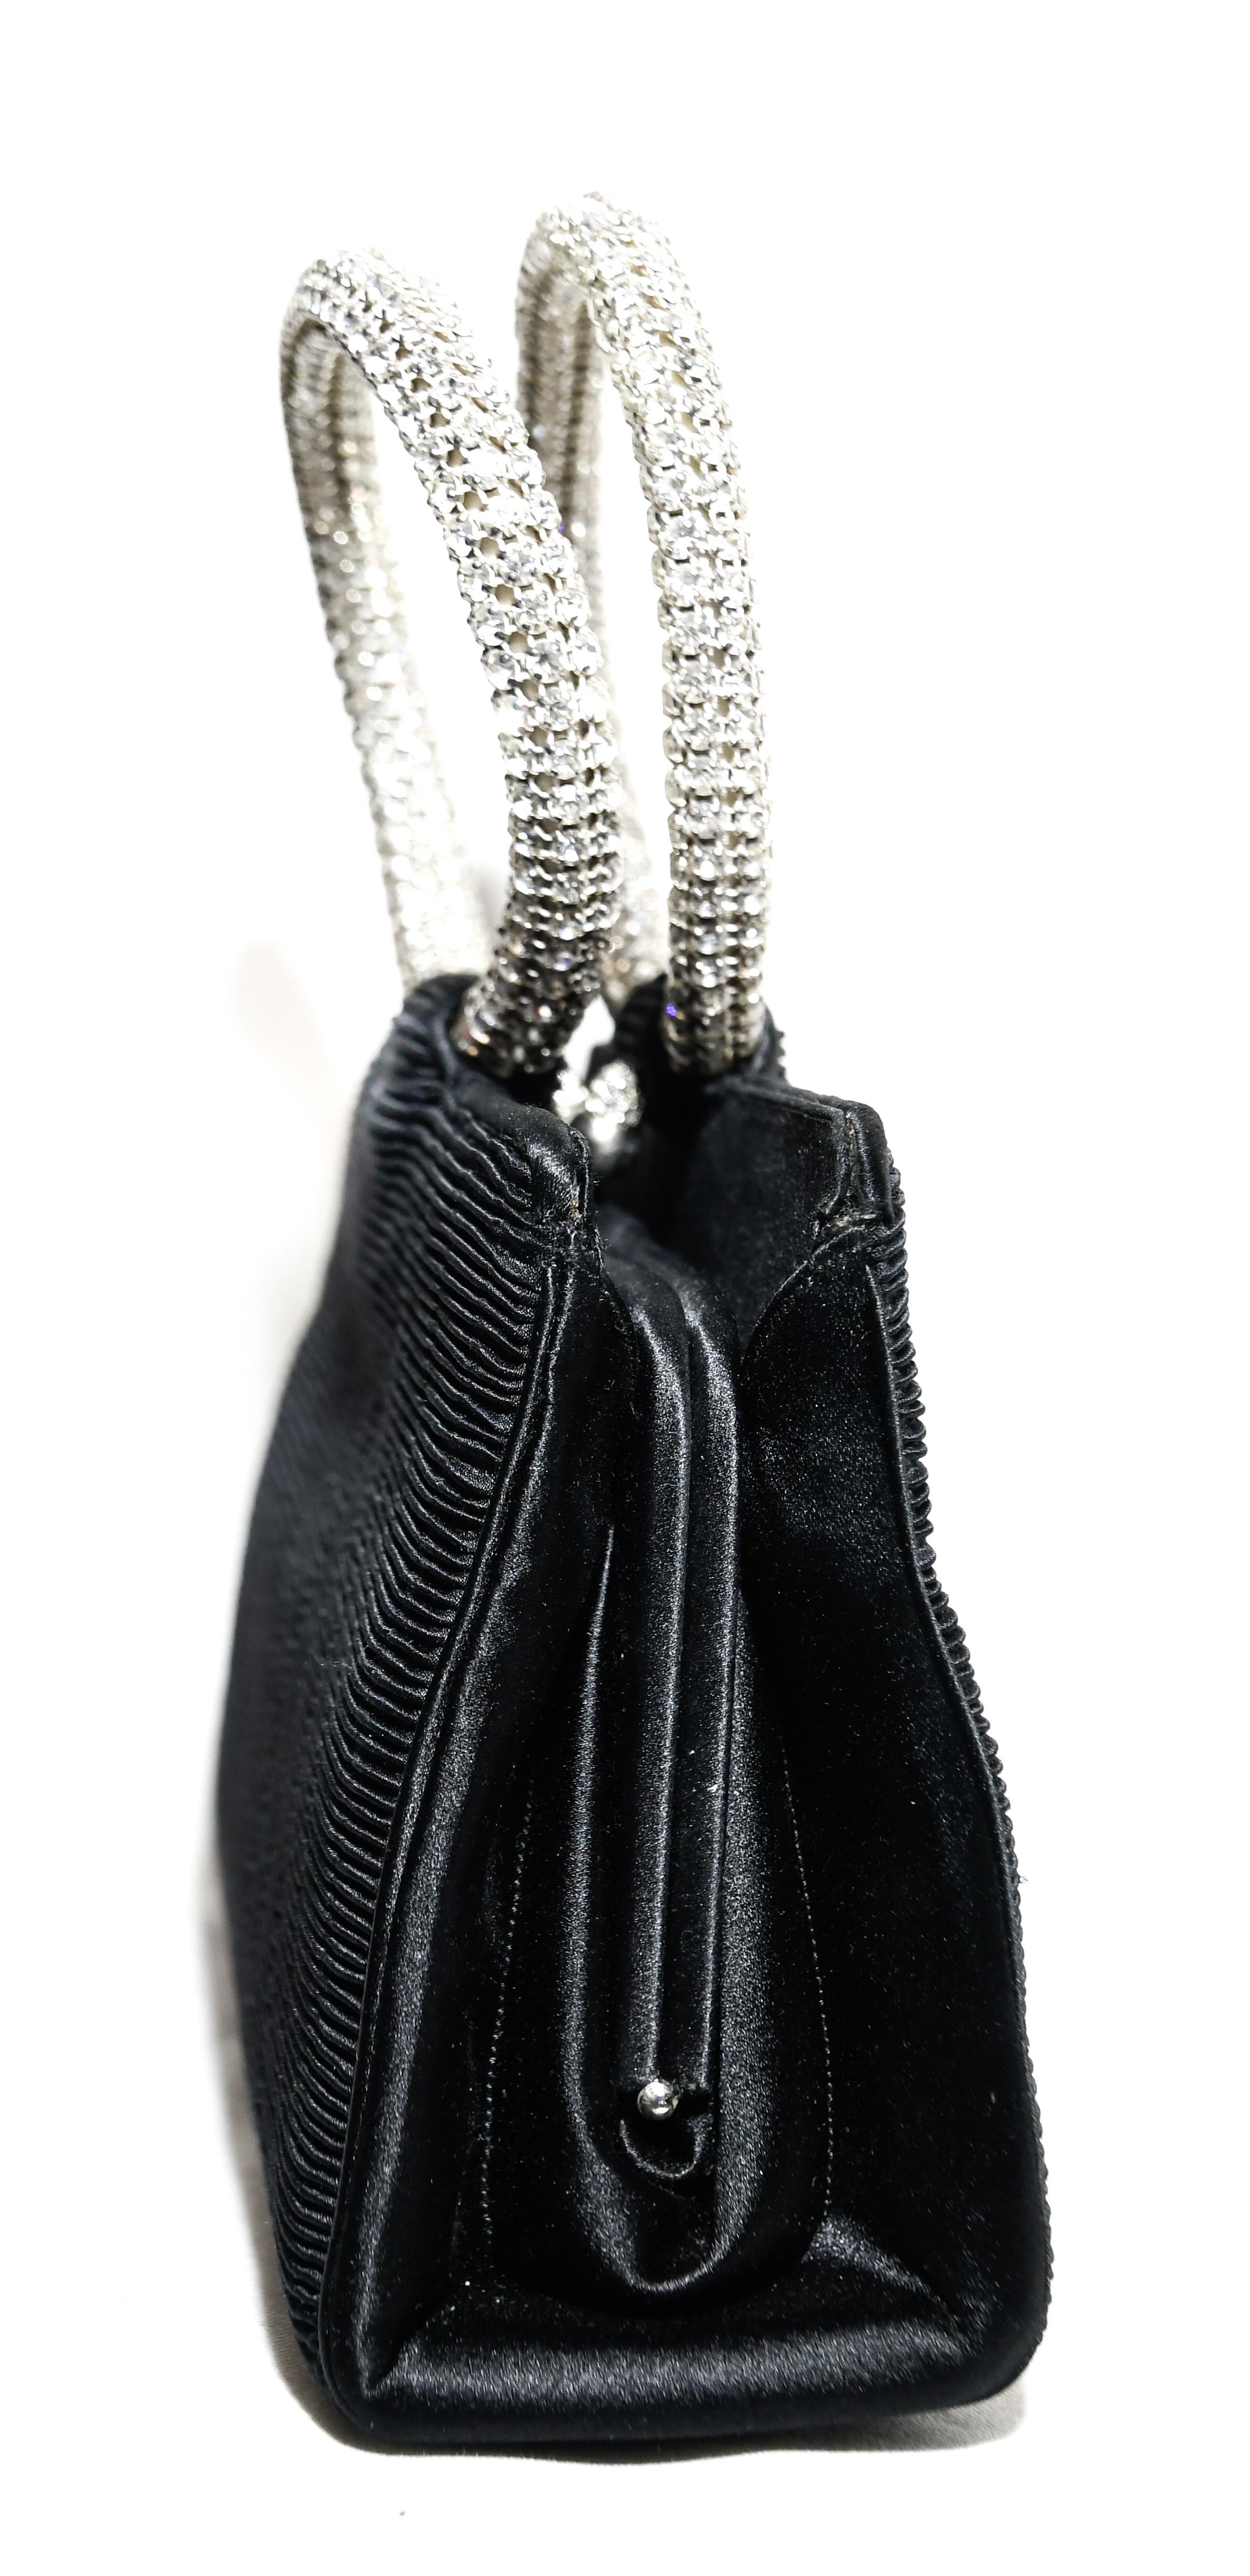 Judith Leiber black ribbed satin  bag incorporates two round  rhinestone covered  top handles.  For closure a rhinestone covered kiss lock snap that opens to a black satin two pocket compartment.  Handle drop: 3.50